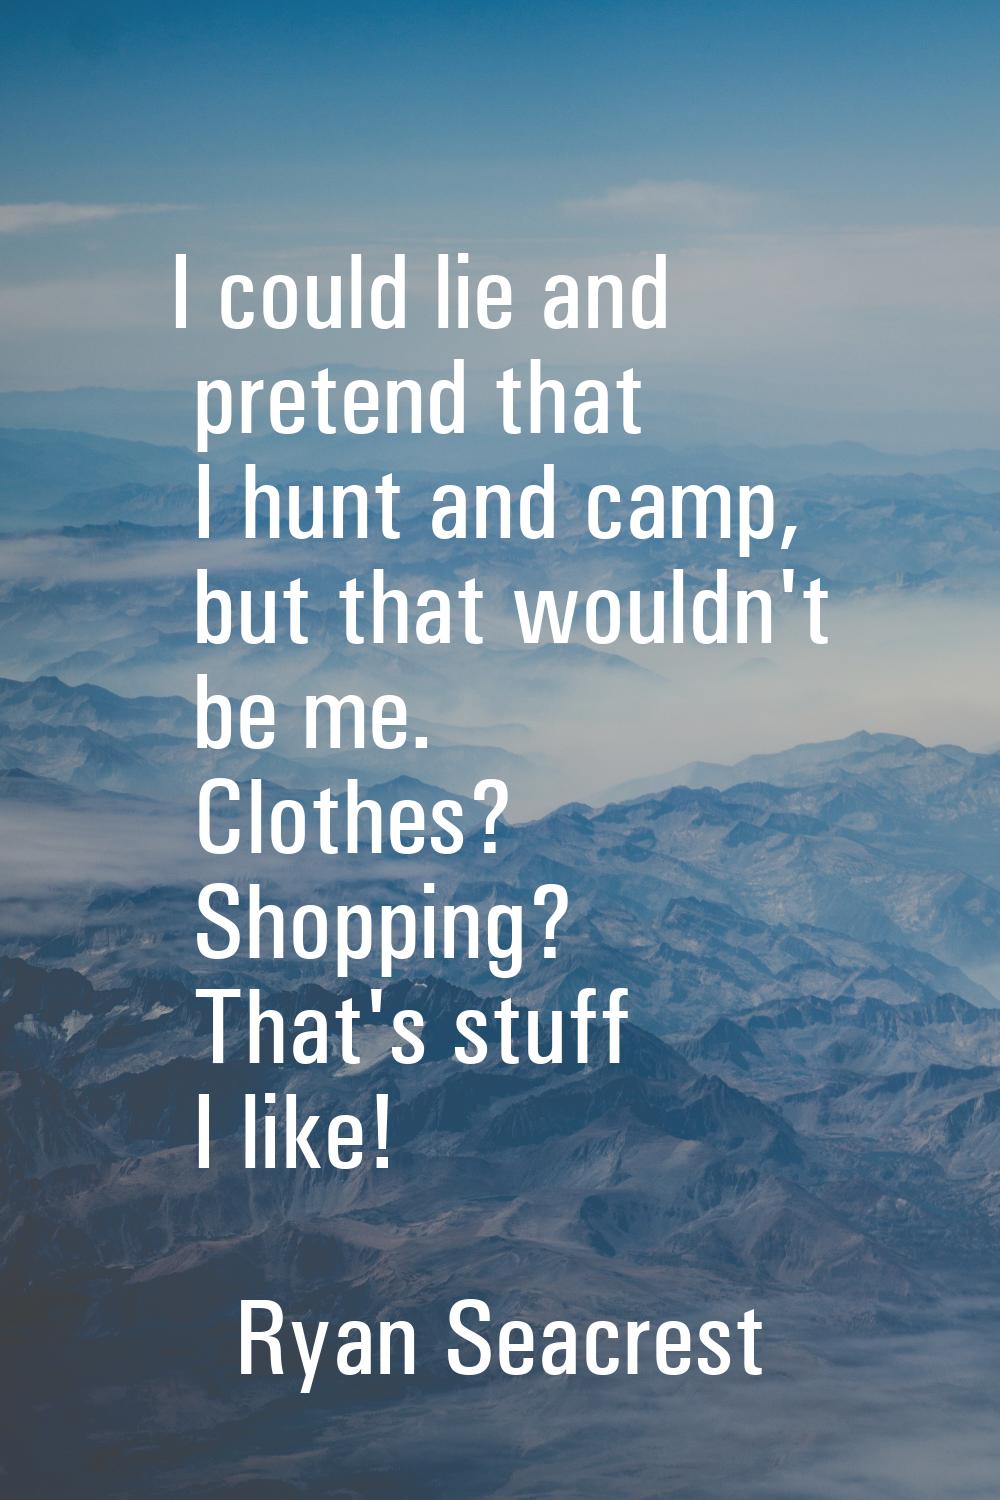 I could lie and pretend that I hunt and camp, but that wouldn't be me. Clothes? Shopping? That's st